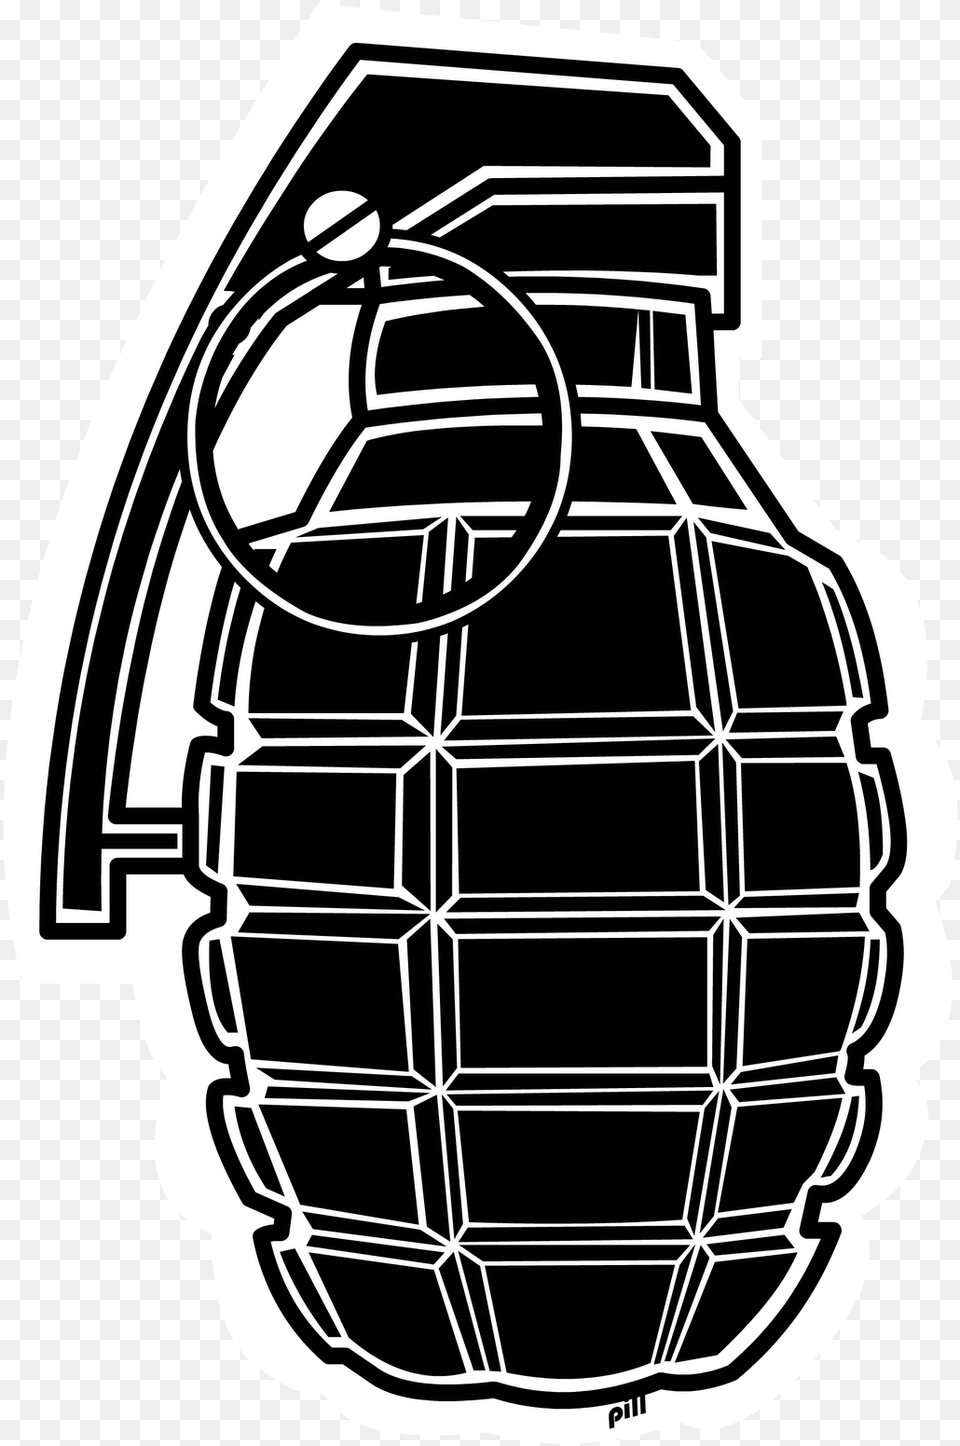 Pineapple Grenade Grenade, Ammunition, Weapon, Bomb Free Png Download